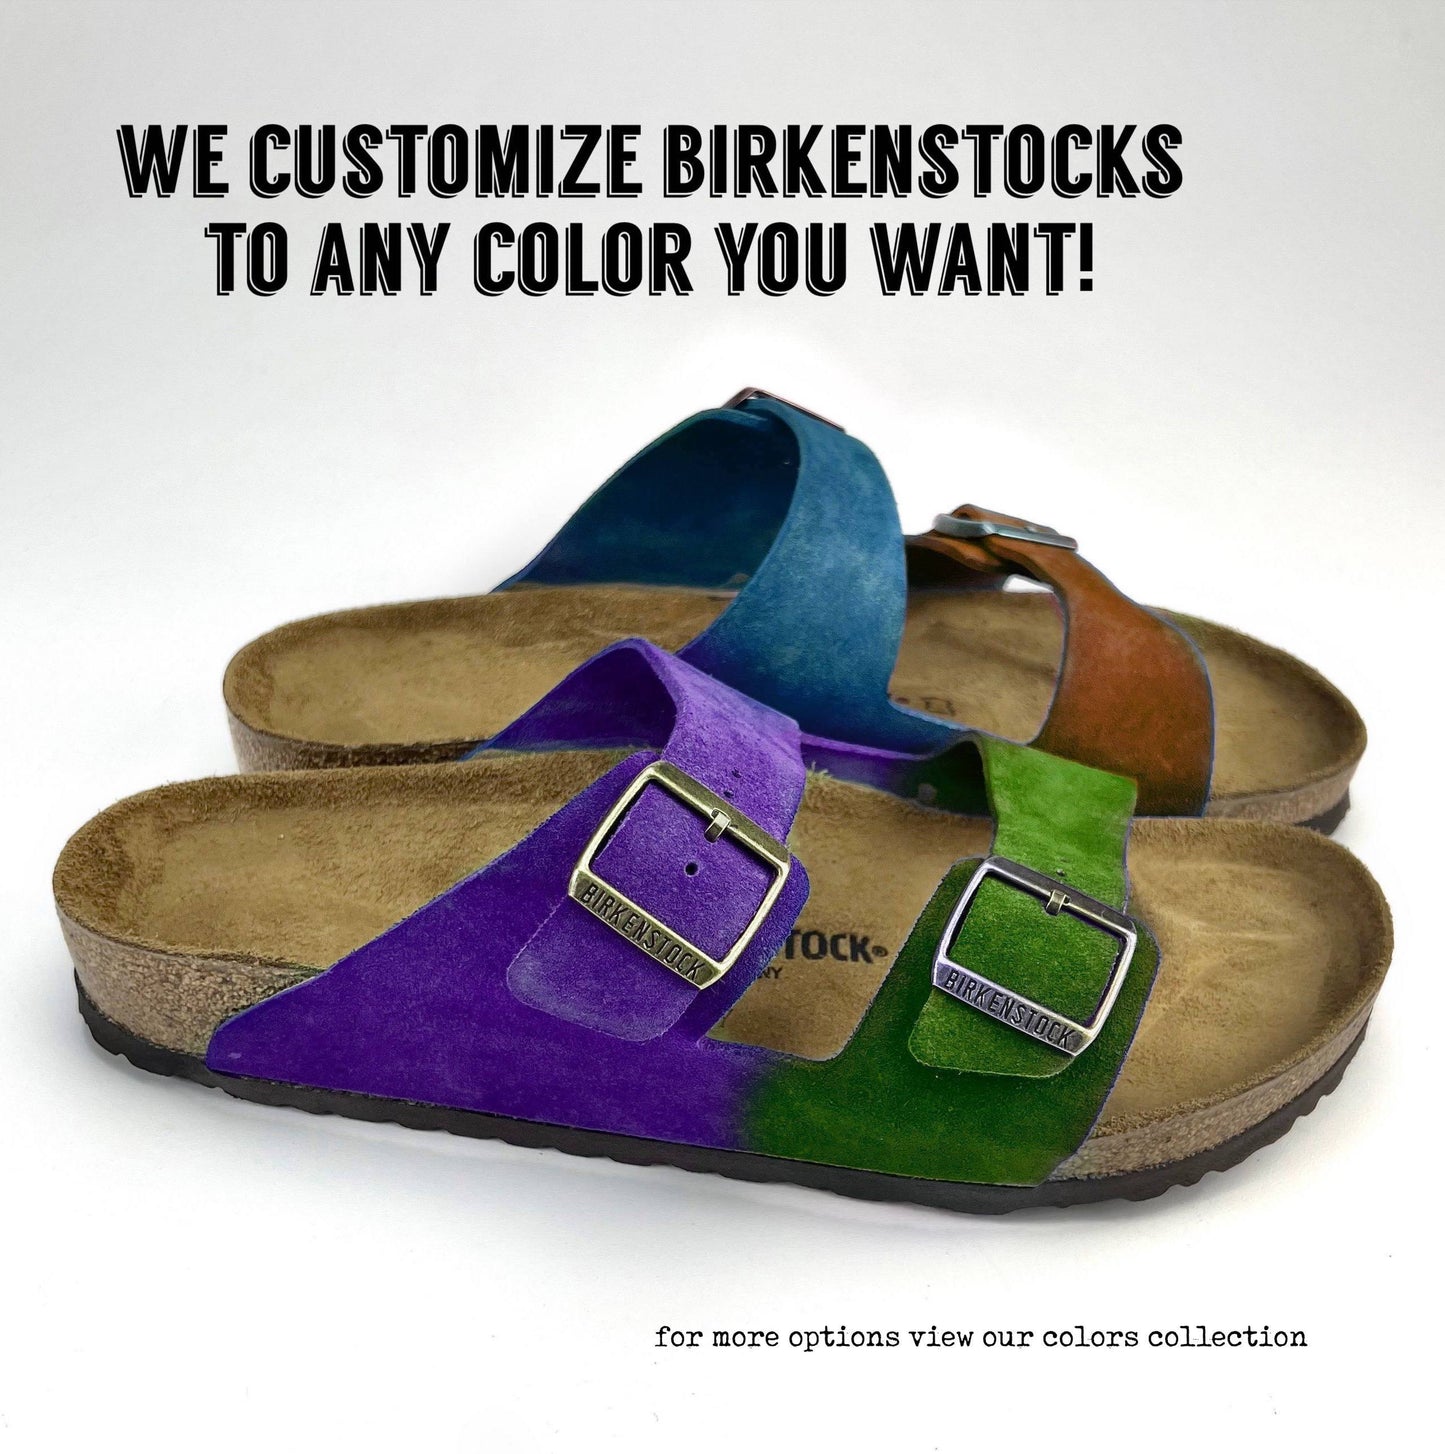 ombre Birkenstock sandals with words that read "we customize birkenstocks in any color" by Butter Makes Me Happy